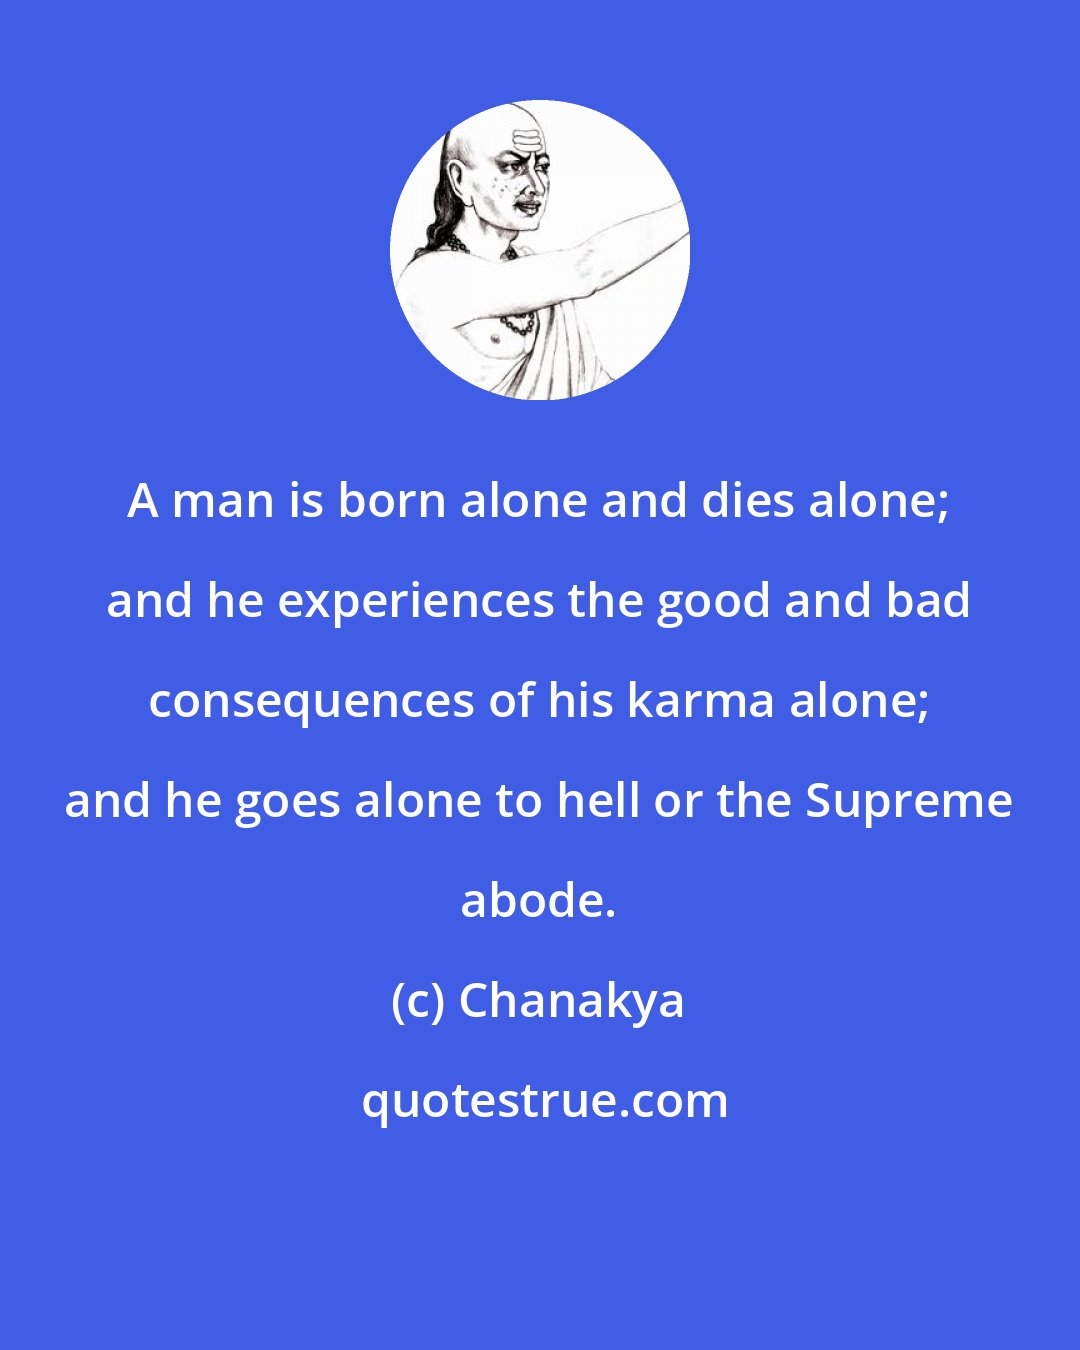 Chanakya: A man is born alone and dies alone; and he experiences the good and bad consequences of his karma alone; and he goes alone to hell or the Supreme abode.